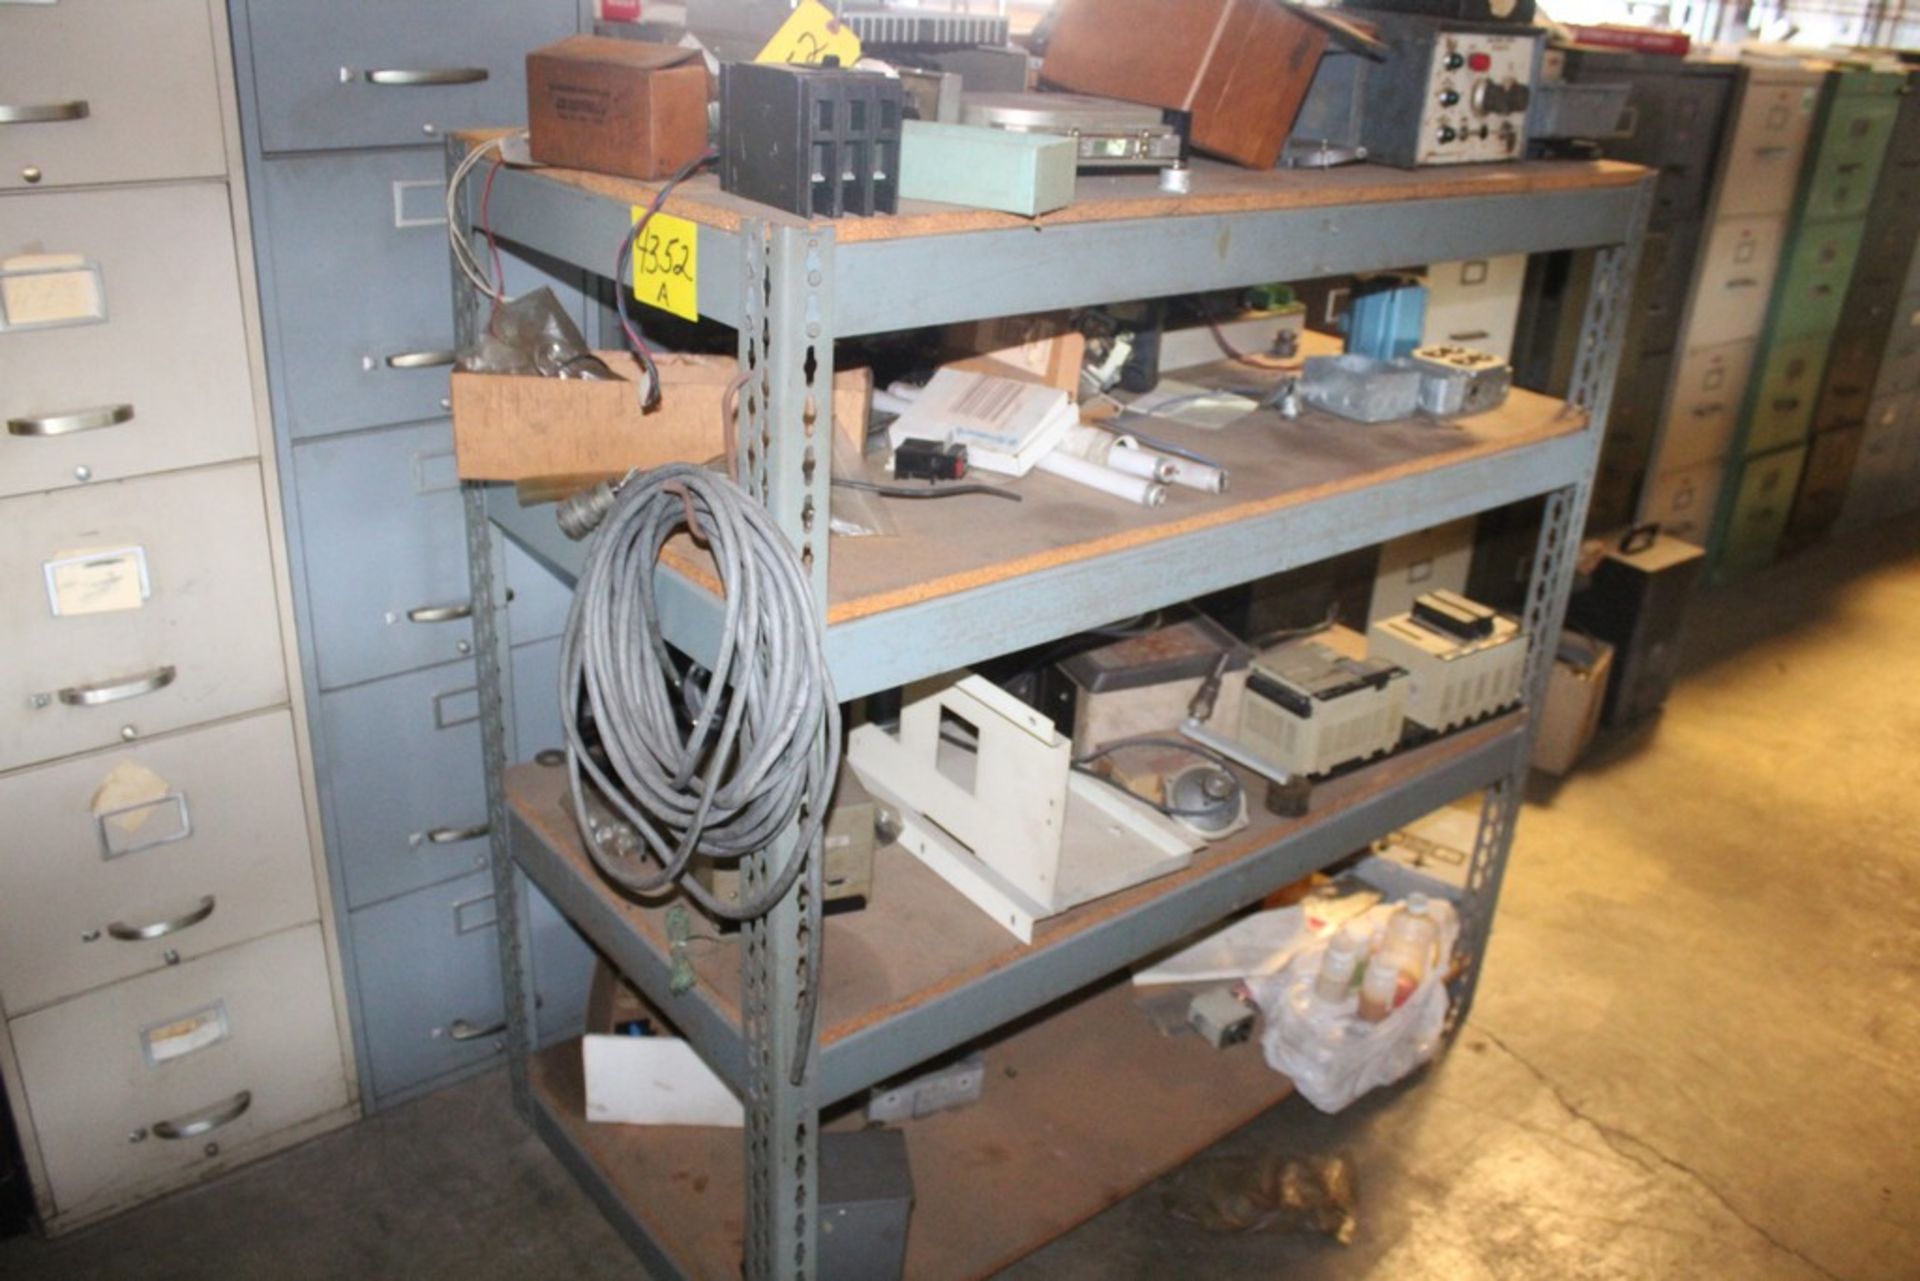 LARGE QTY OF ELECTRICAL PARTS ON SHELVING UNIT